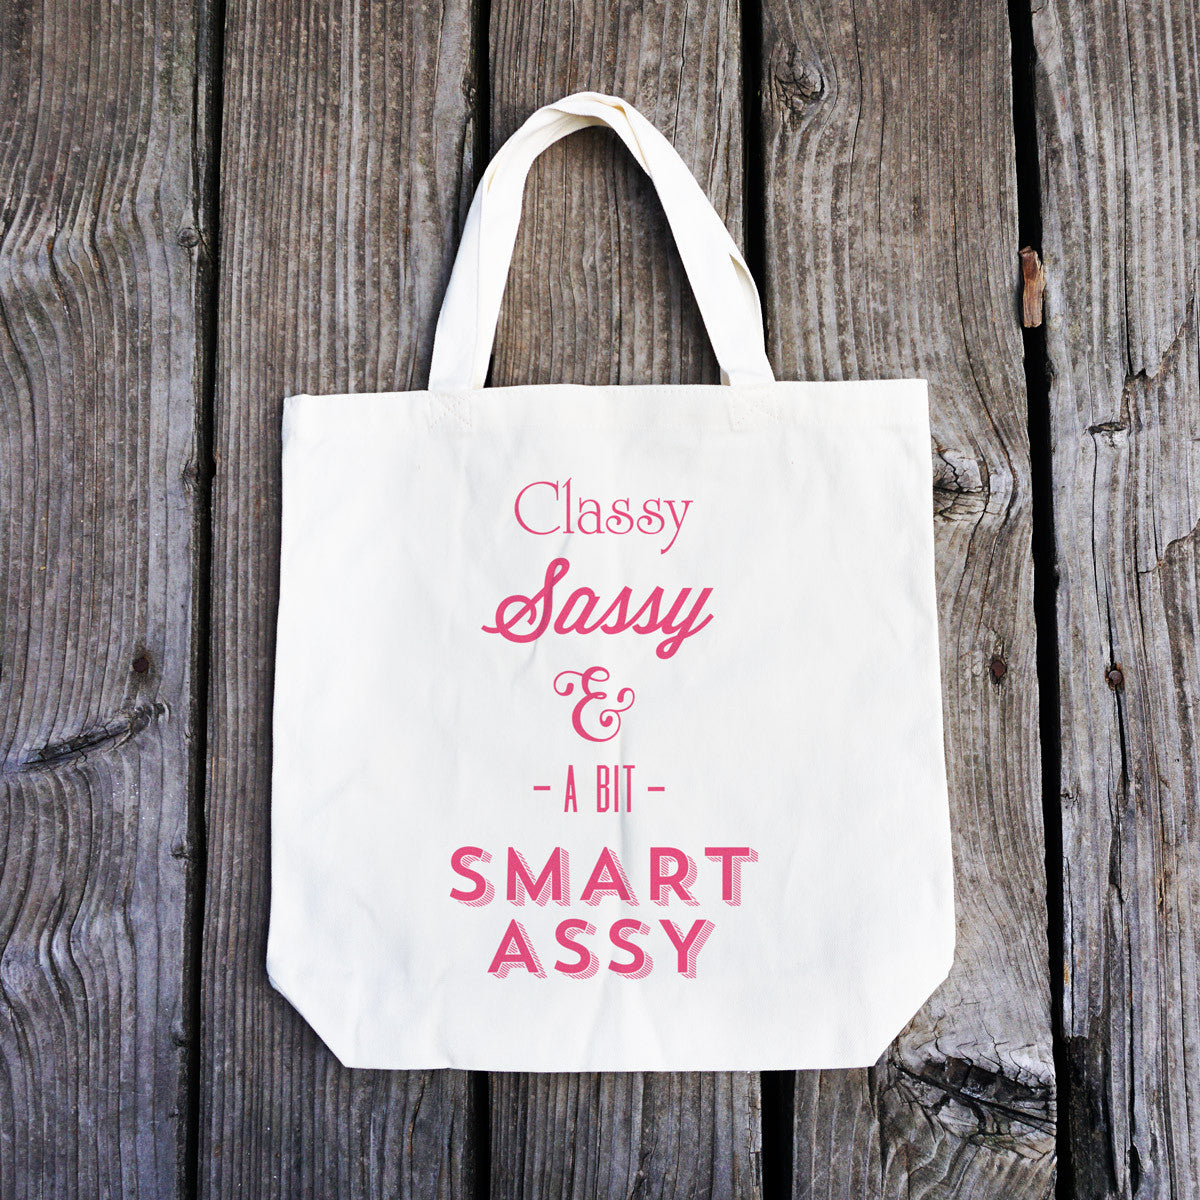 Classy Sassy and a Bit Smart Assy Cotton Tote Bag